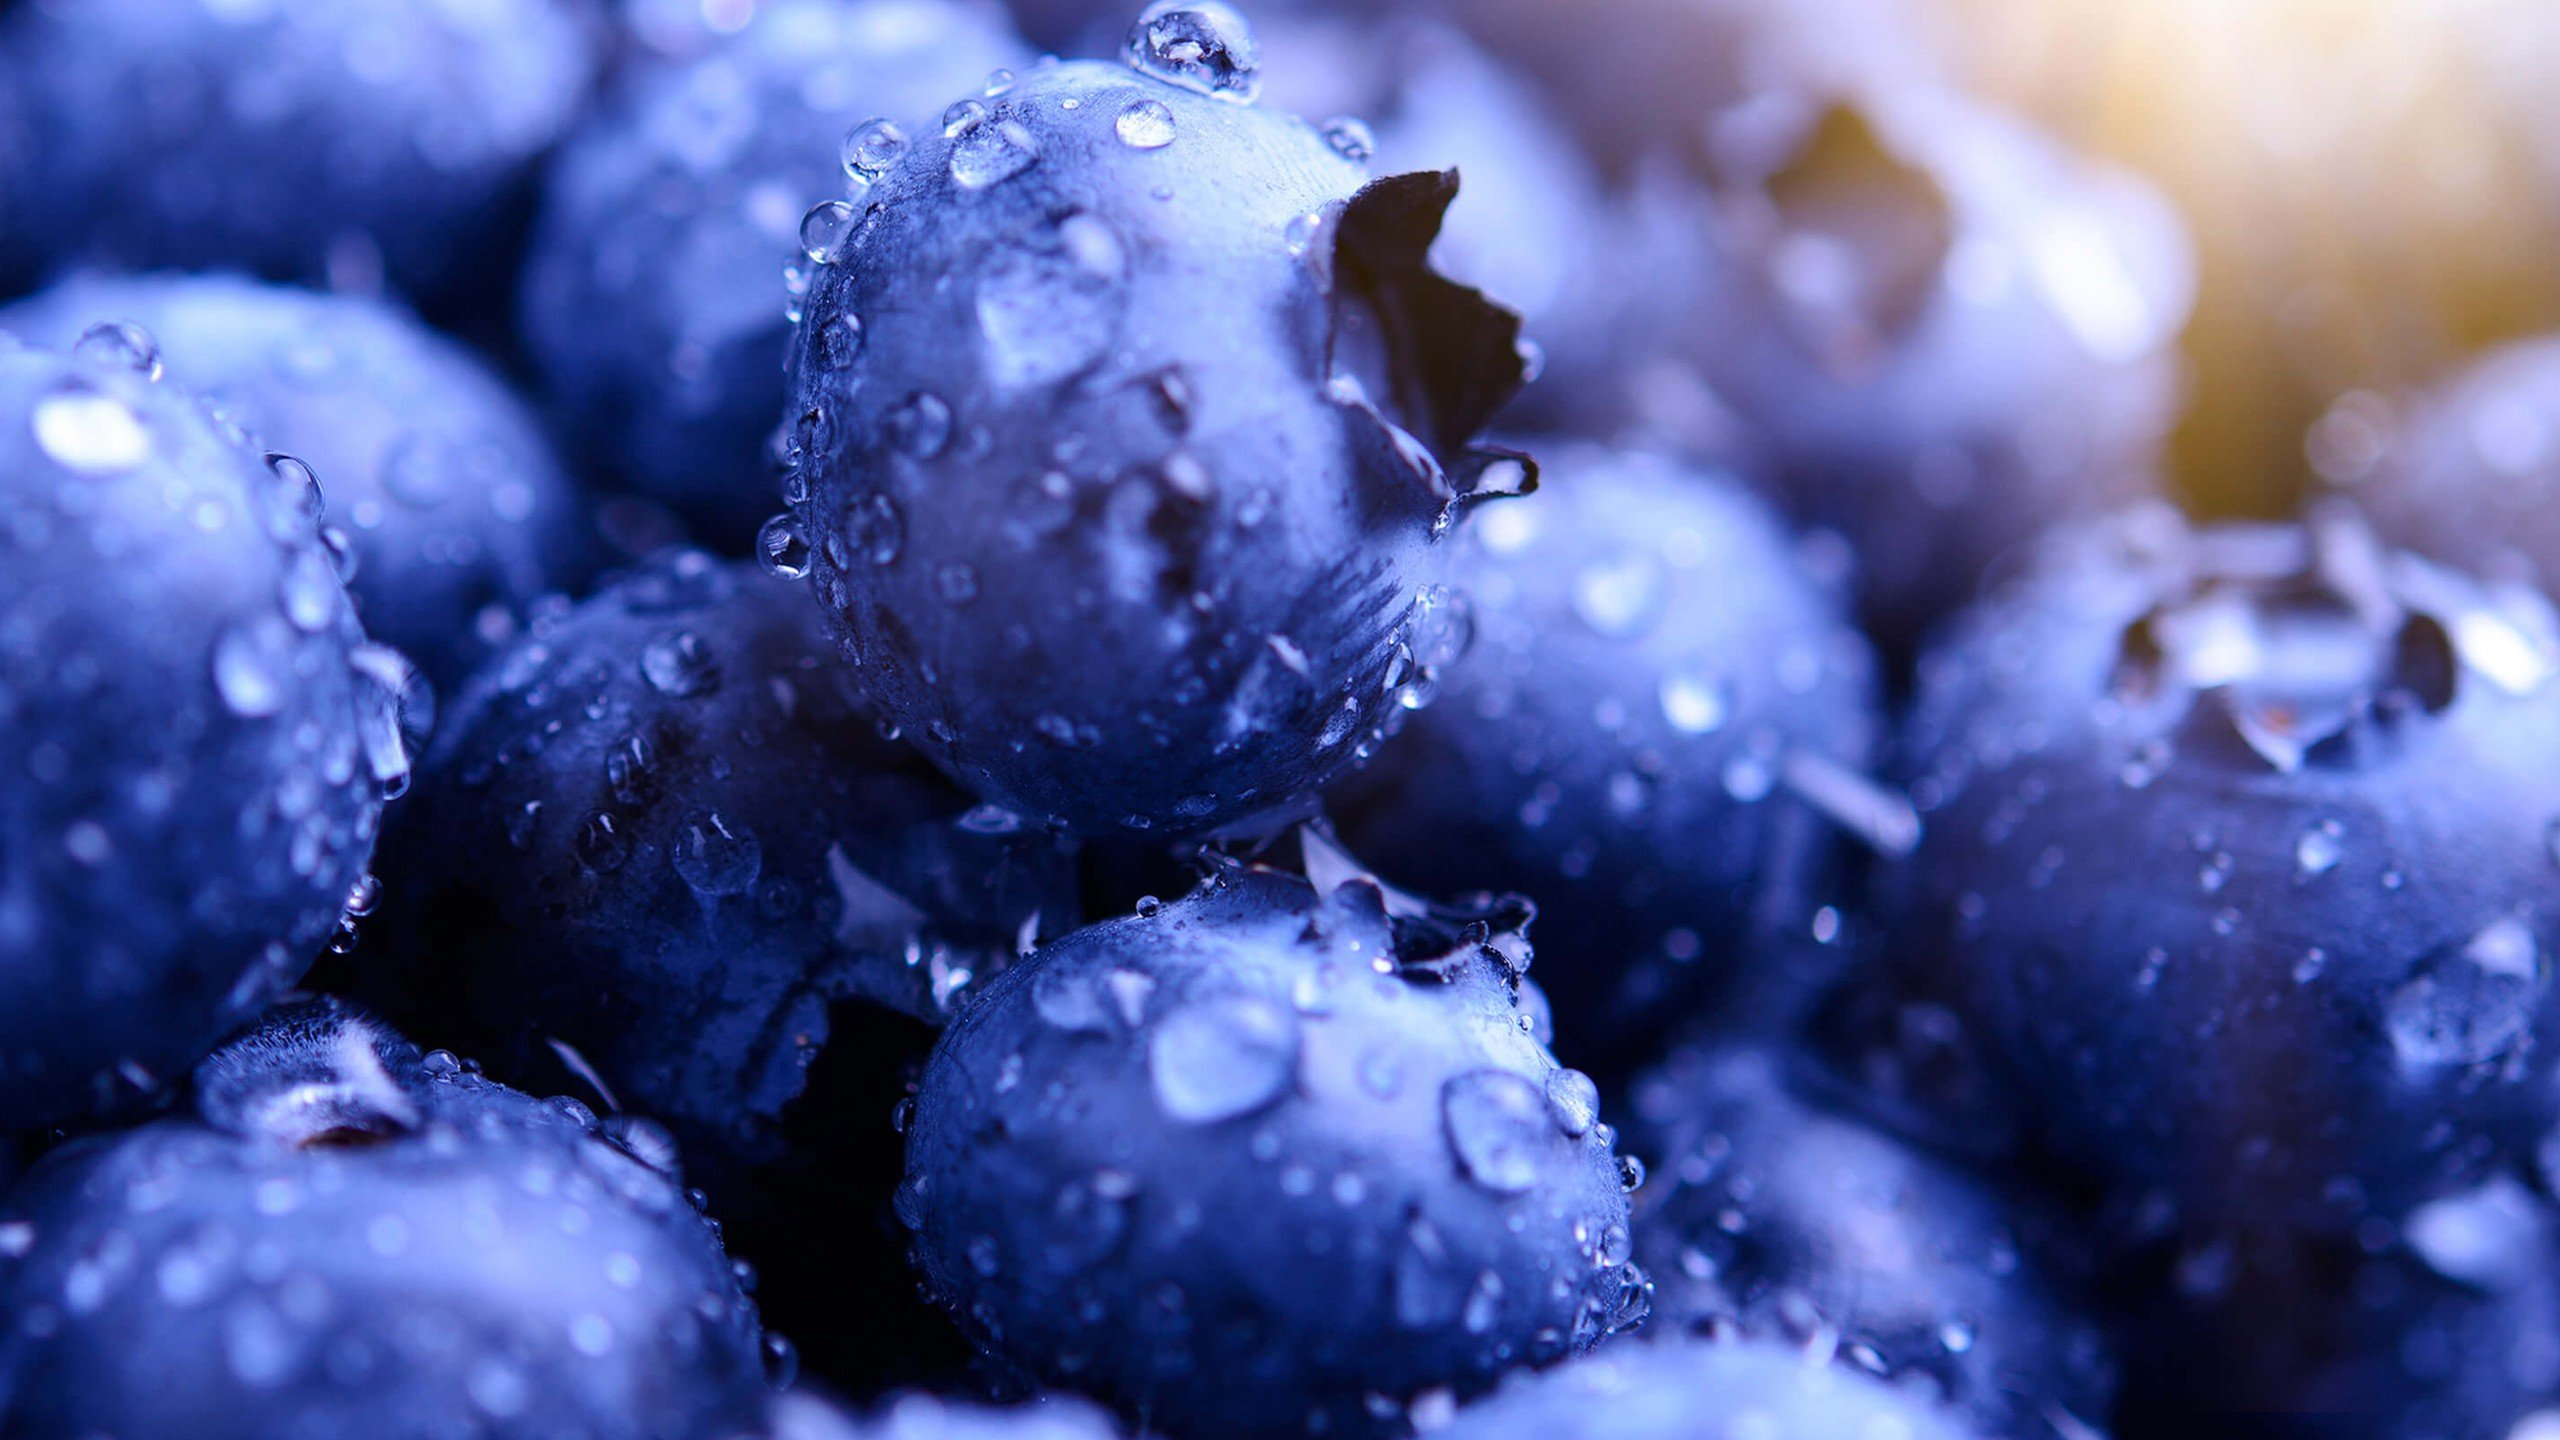 Wallpaper Blueberries with drops of water